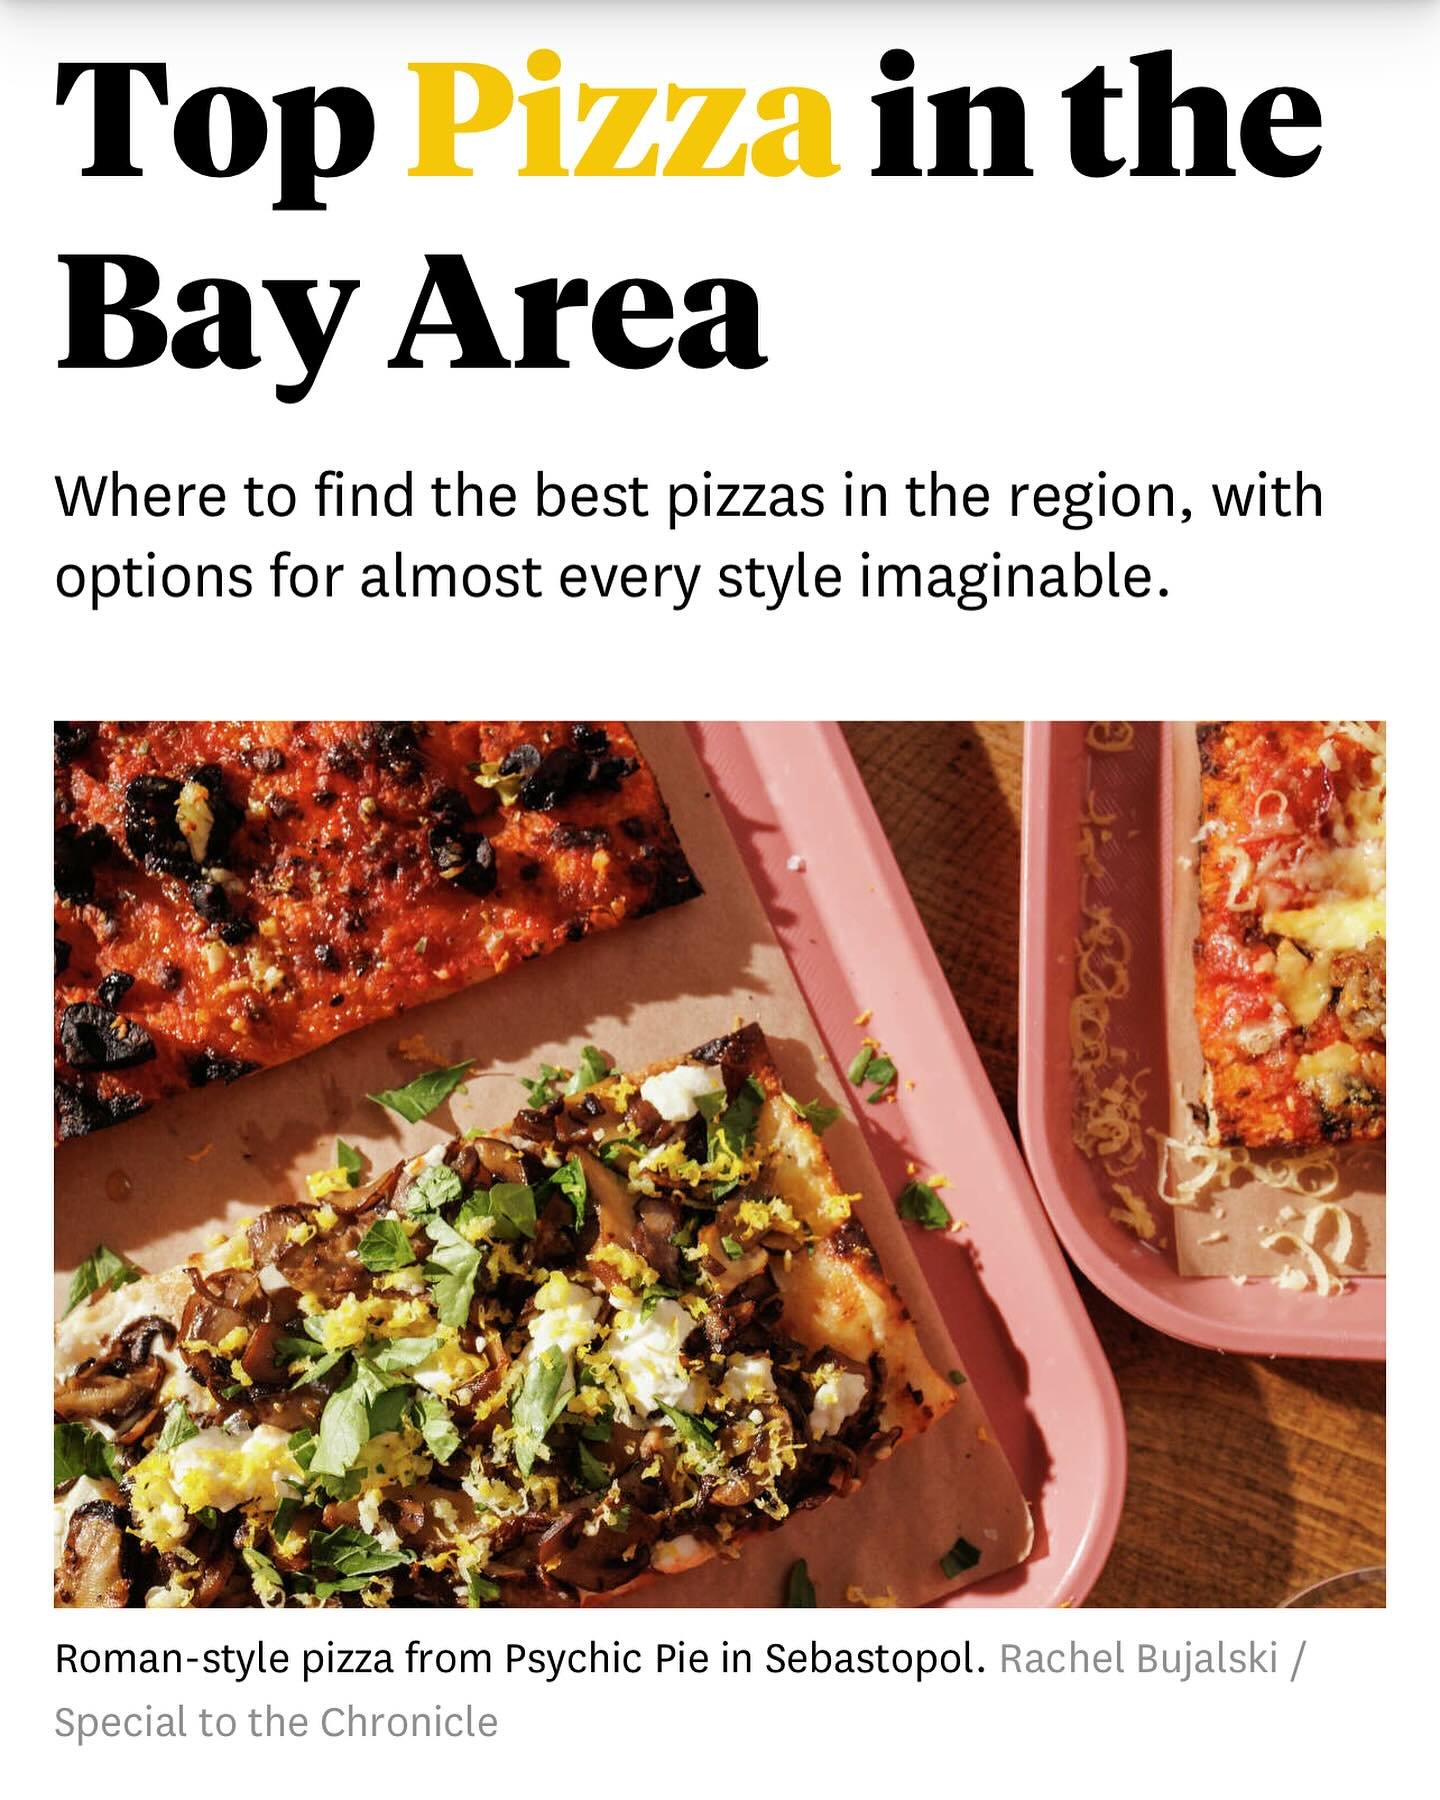 We are thrilled to be named one of the best pizza spots in the Bay area 🍕  Thank you @sfchronicle for including us!

Come taste our classic, tavern-style, and sicilian-inspired pan pizzas, all made with the freshest, local ingredients ❤️ 

Check out